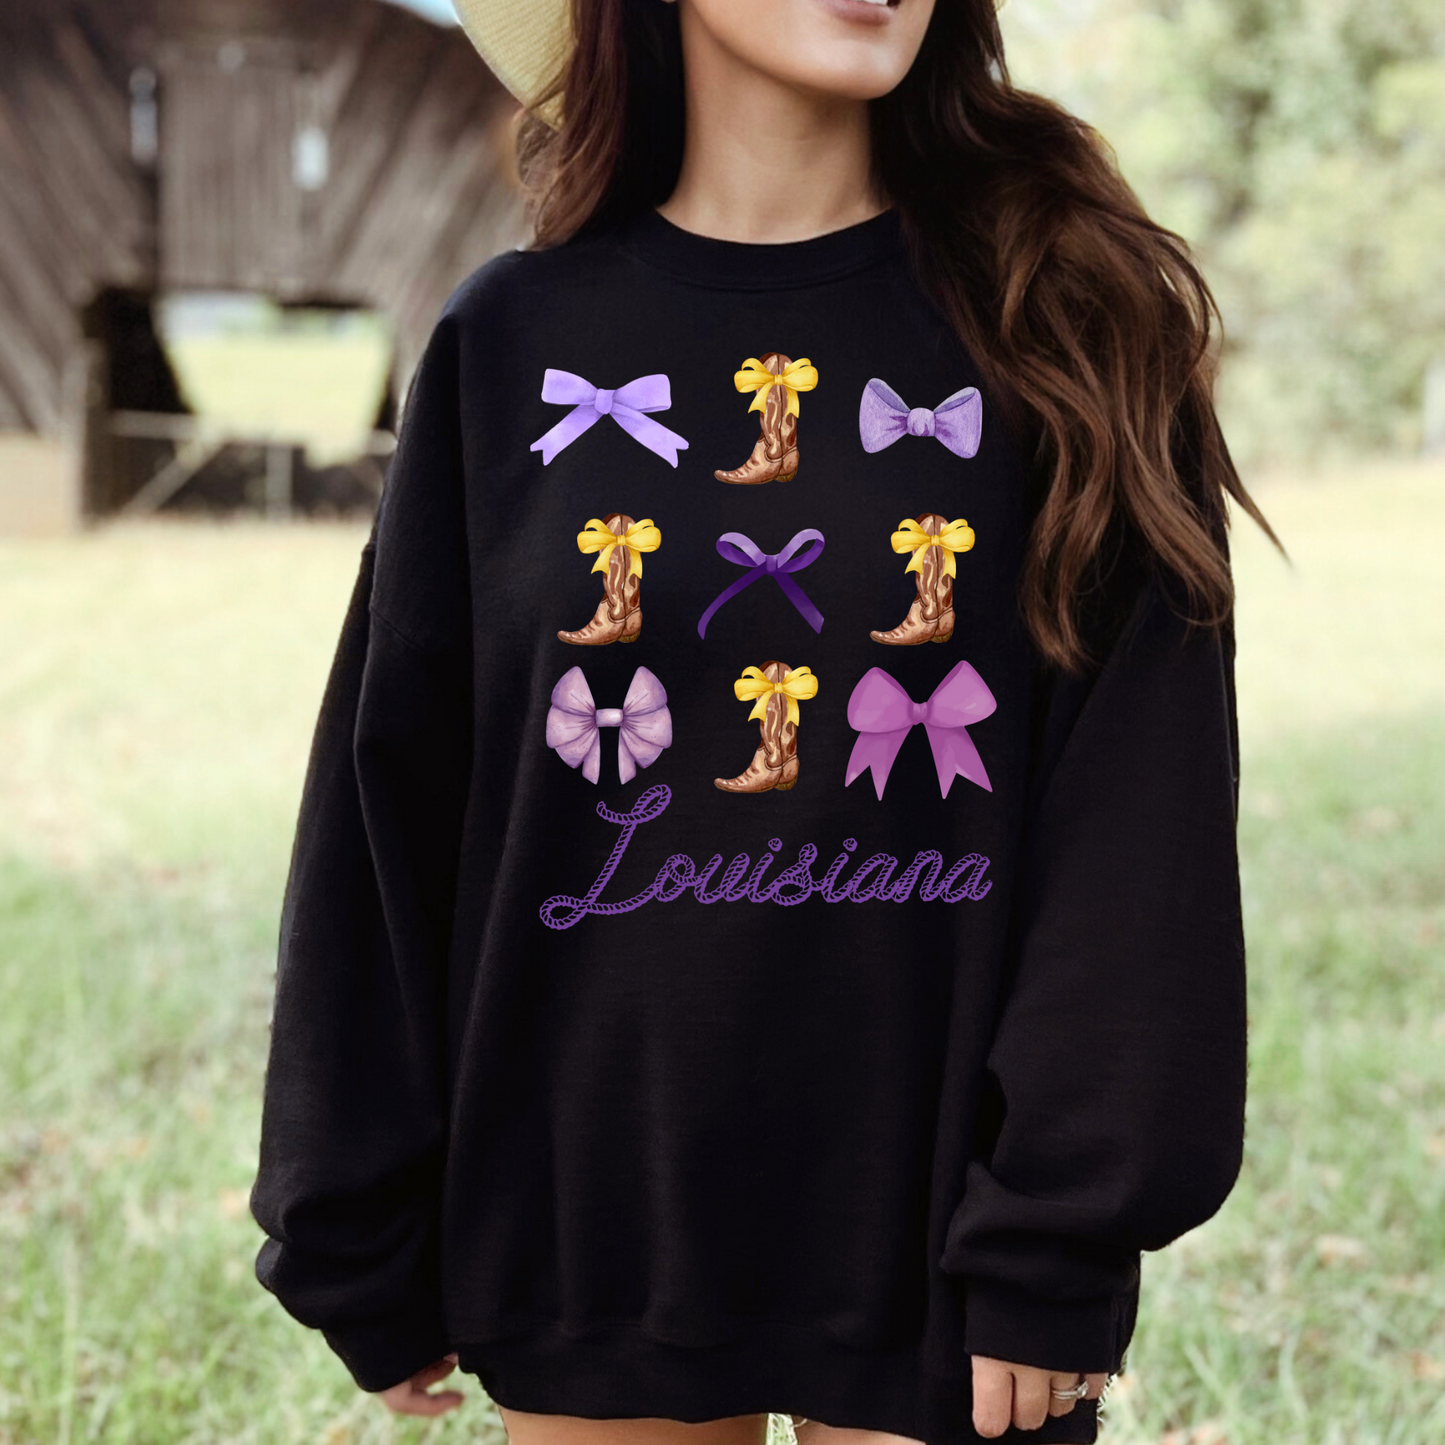 (shirt not included) Louisiana boots and Bows - Clear Film Transfer